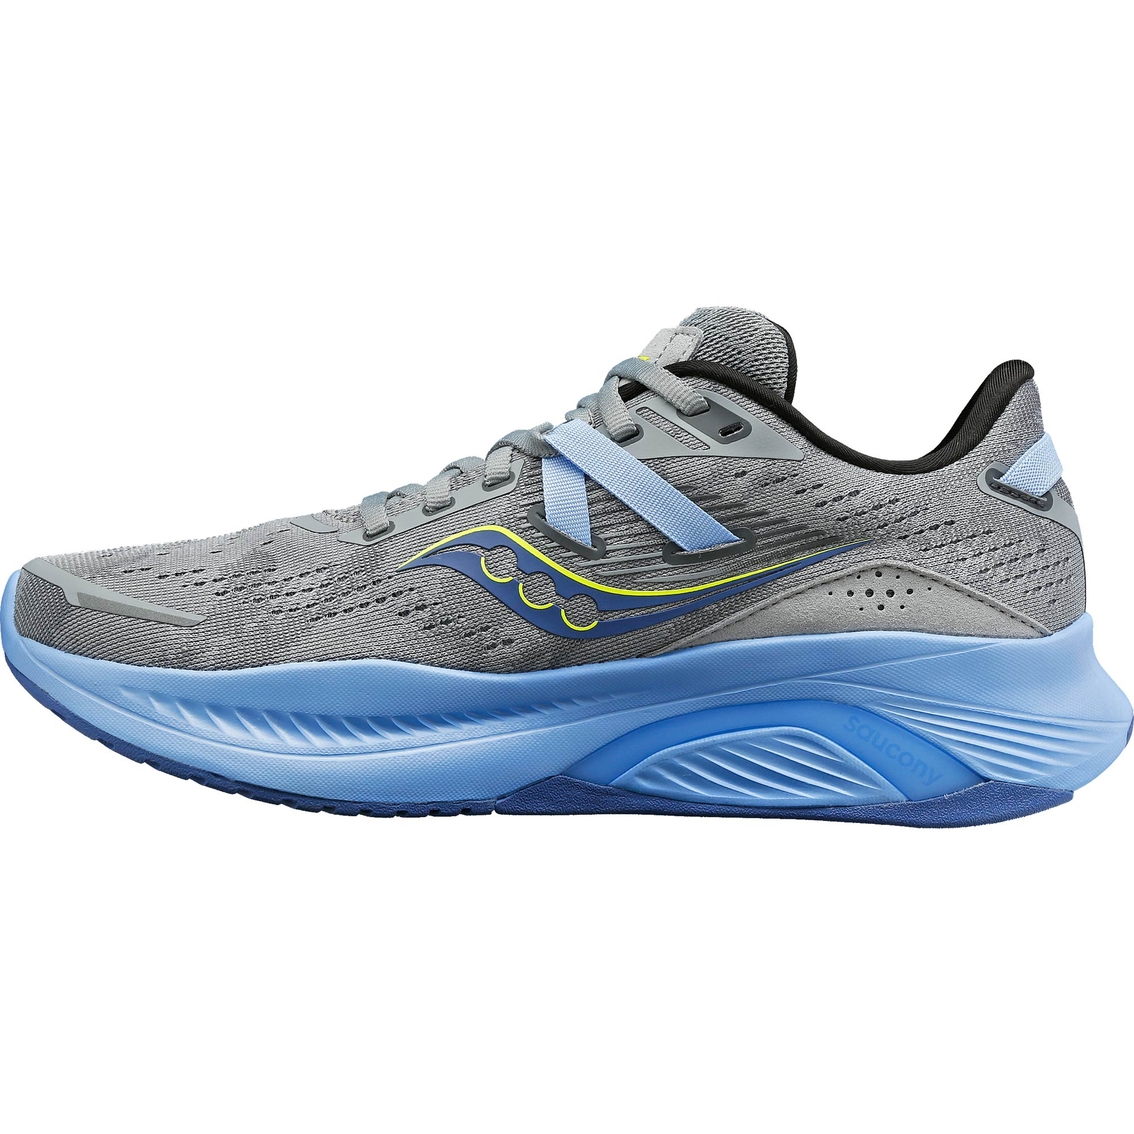 Saucony Women's Guide 16 Running Shoes - Image 3 of 5